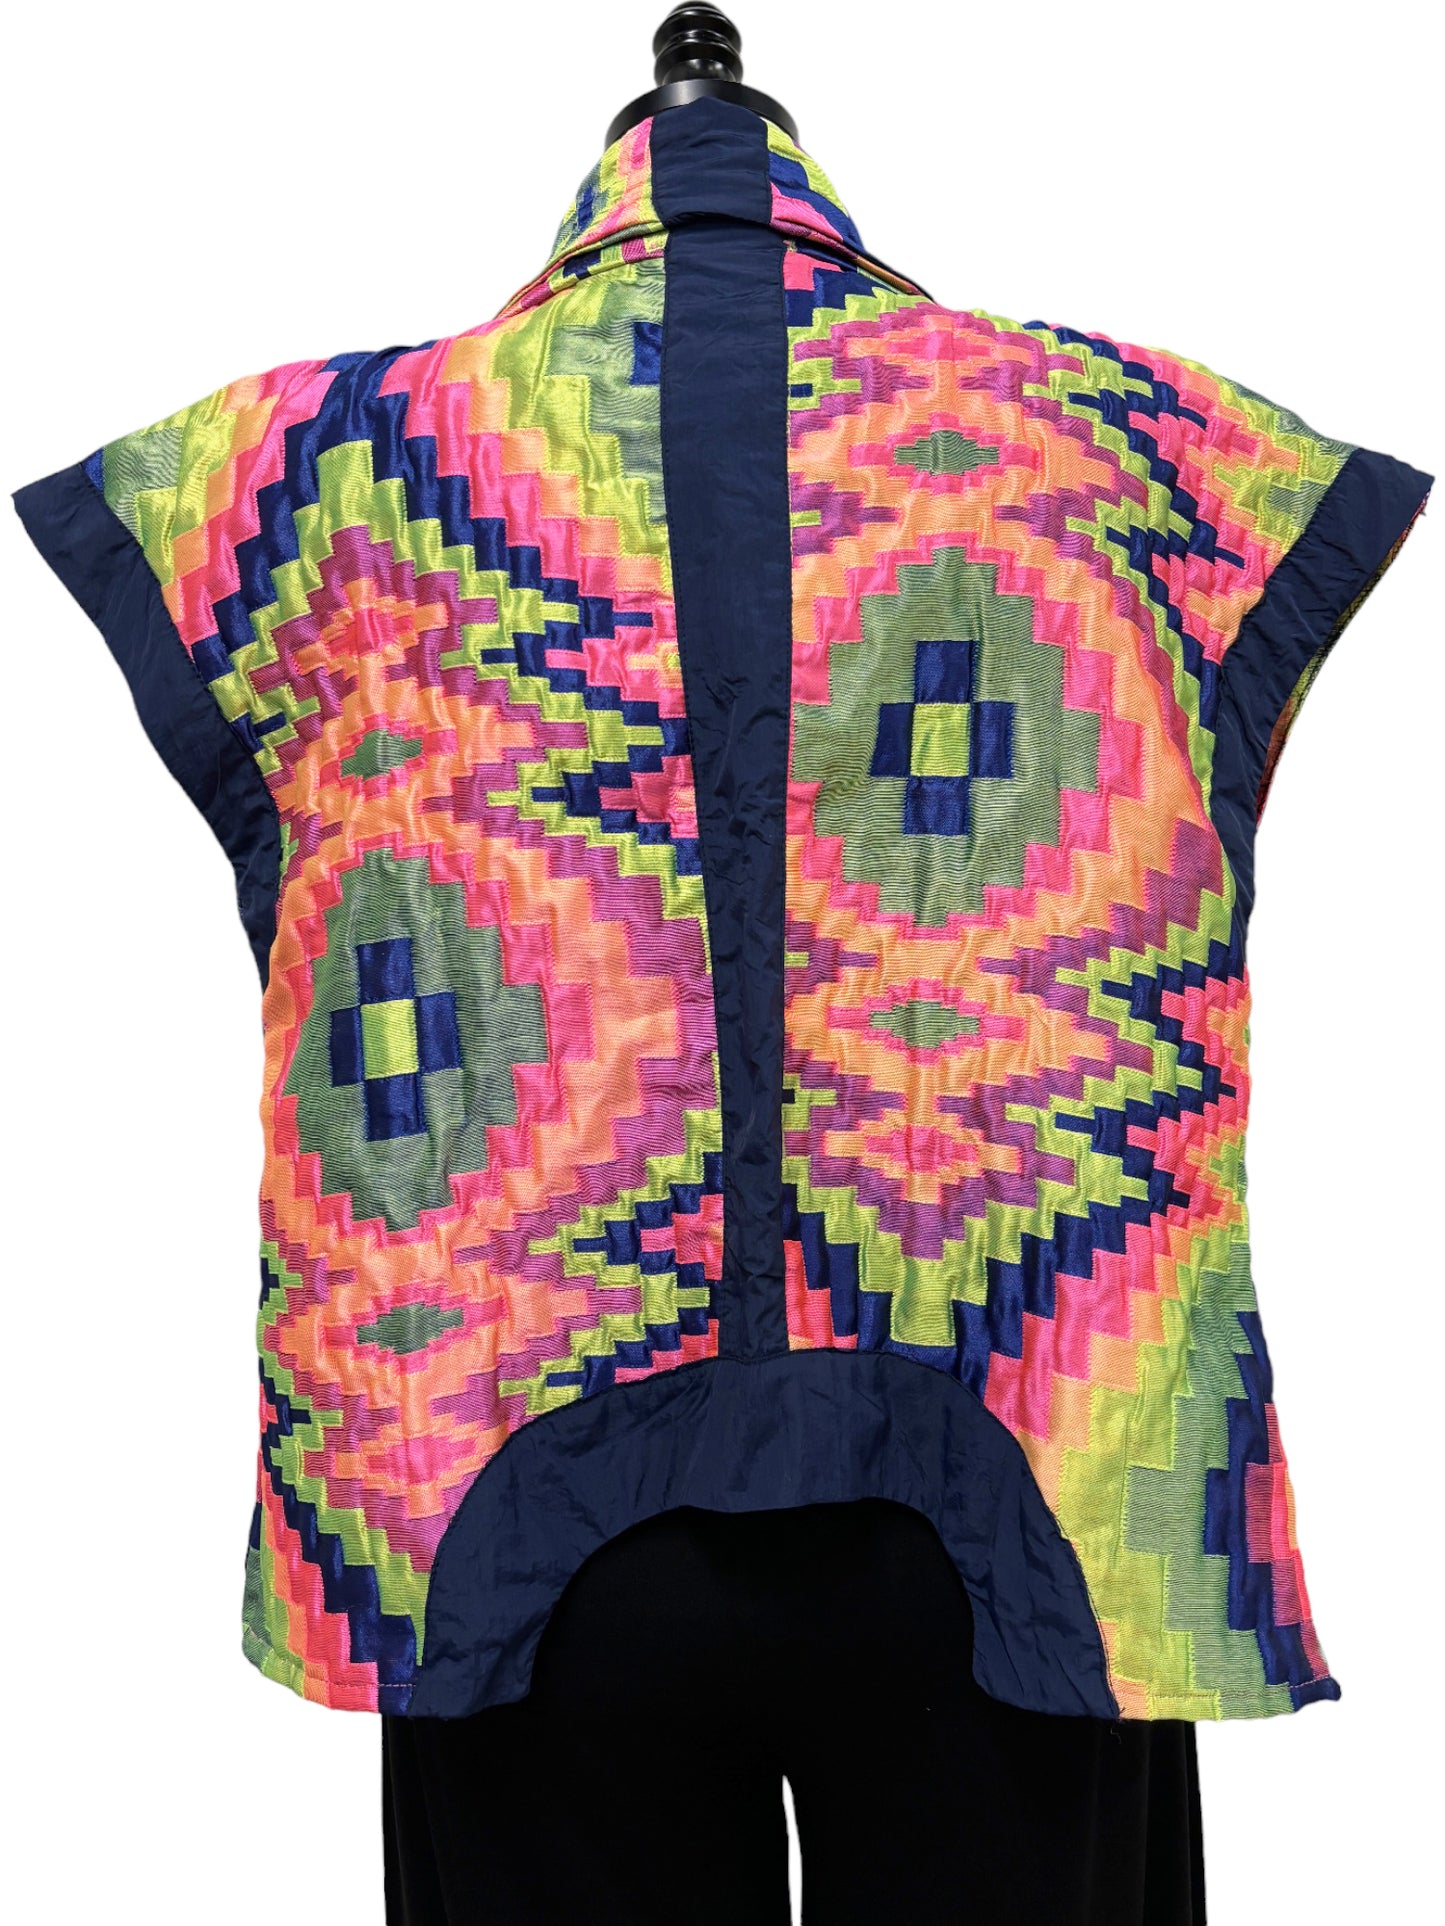 Athens Vest in Groovy